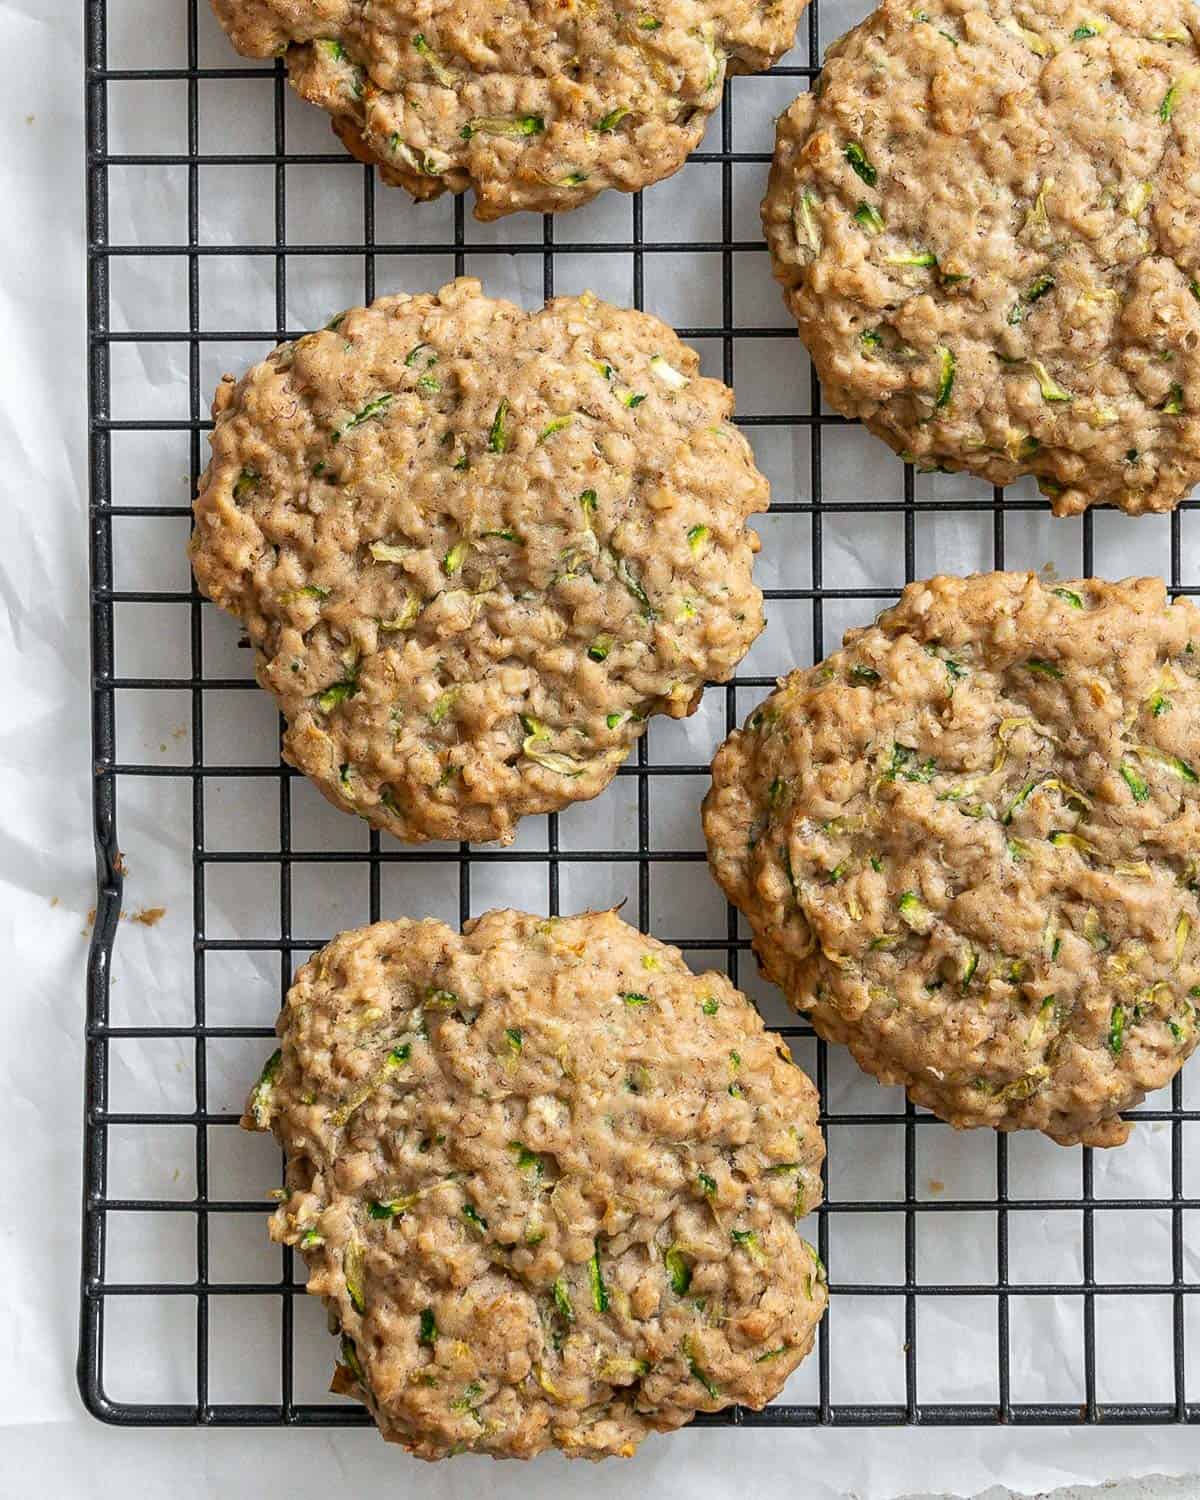 completed Oatmeal Zucchini Cookies on wire rack